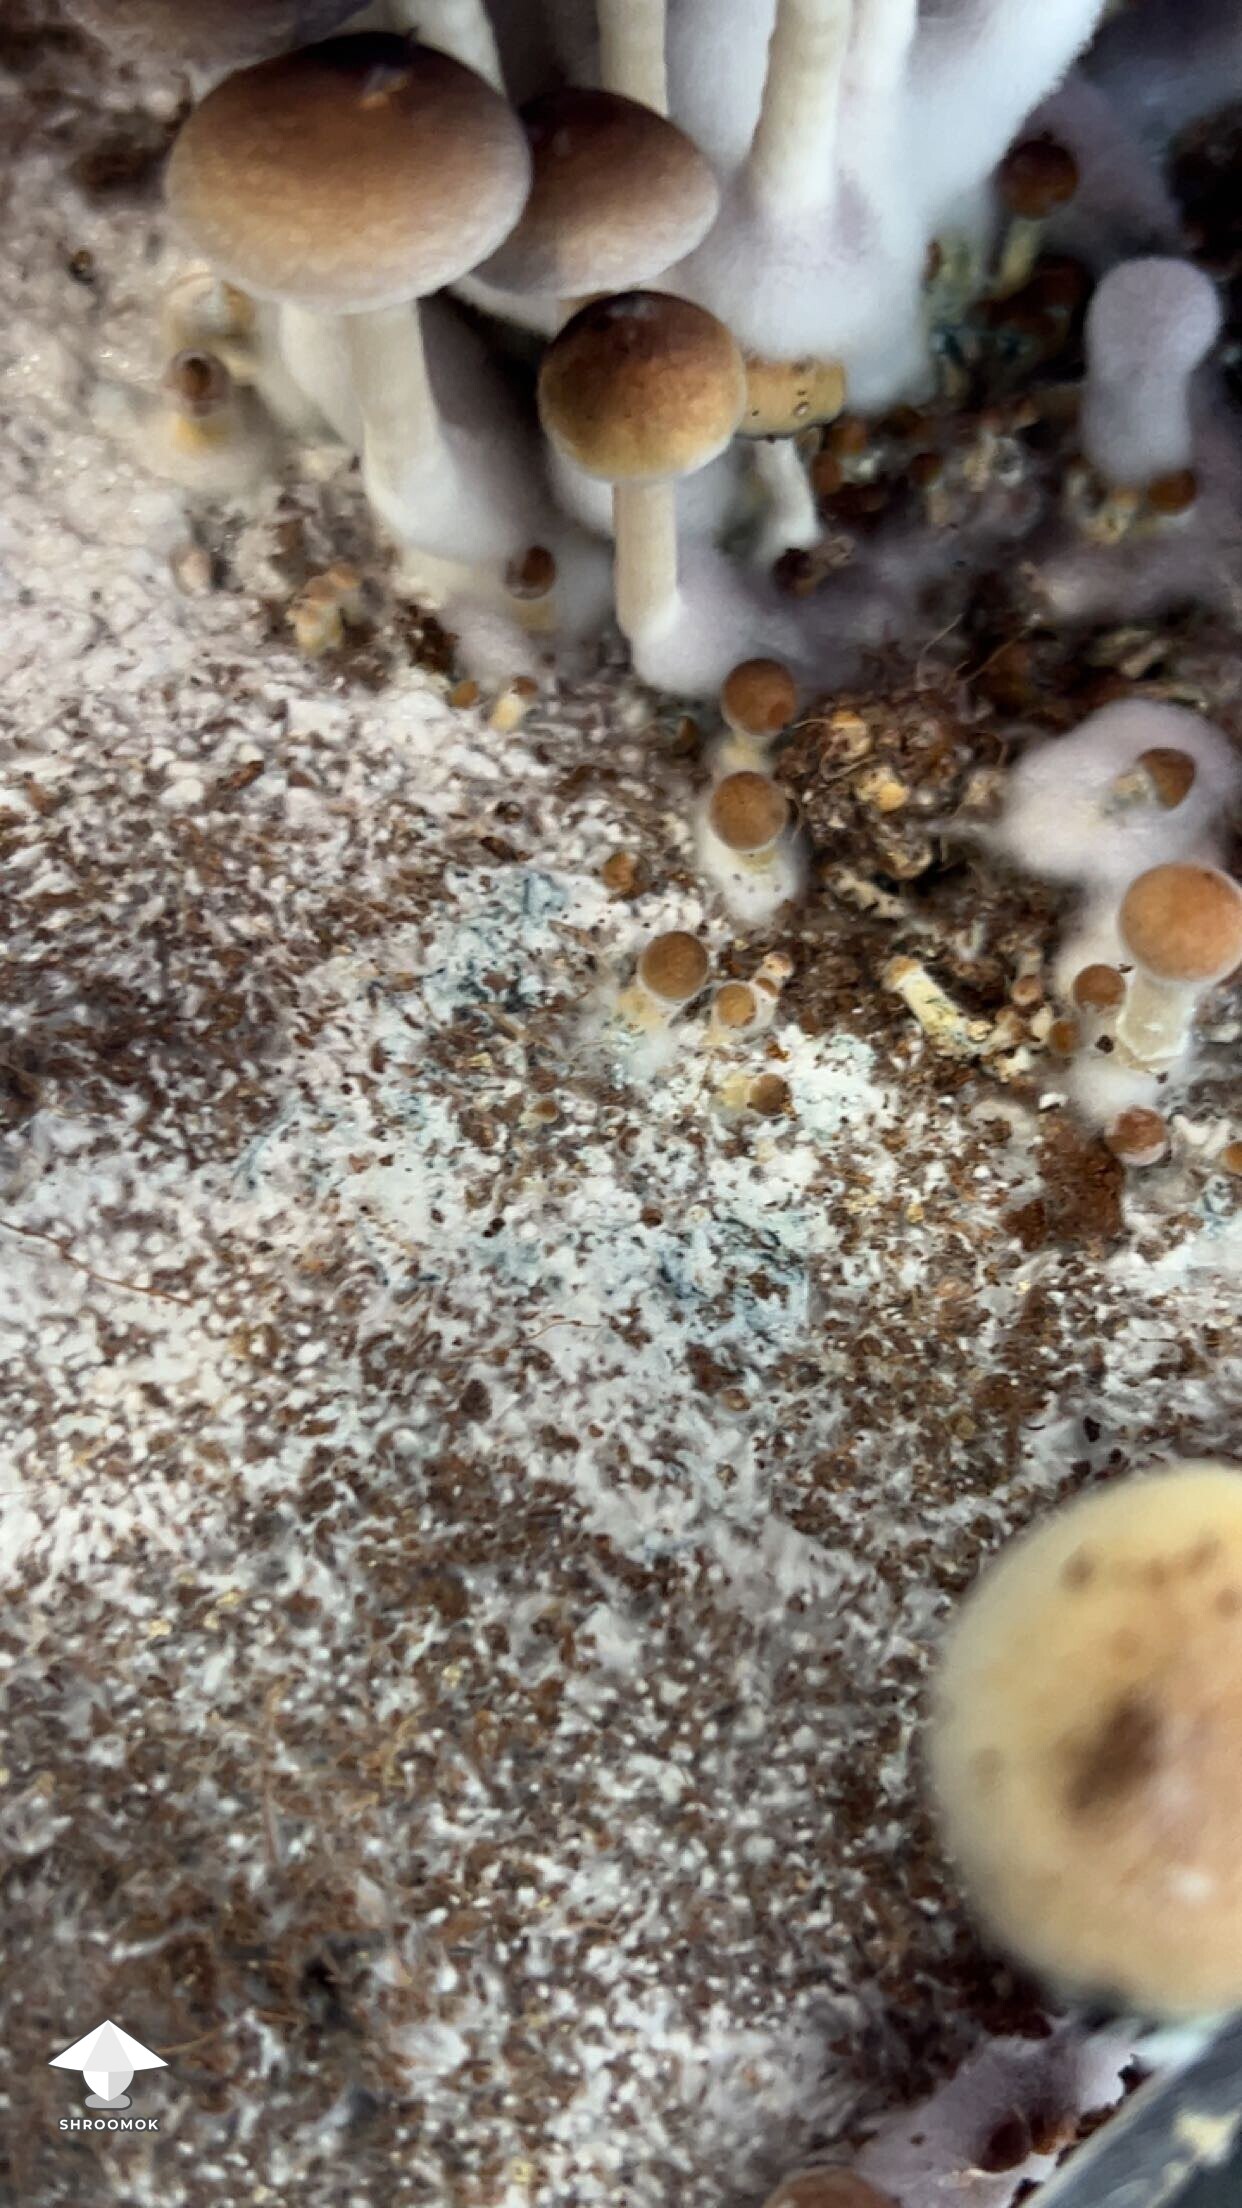 Signs of mycelium bruises on the cake which are confused with mold contamination